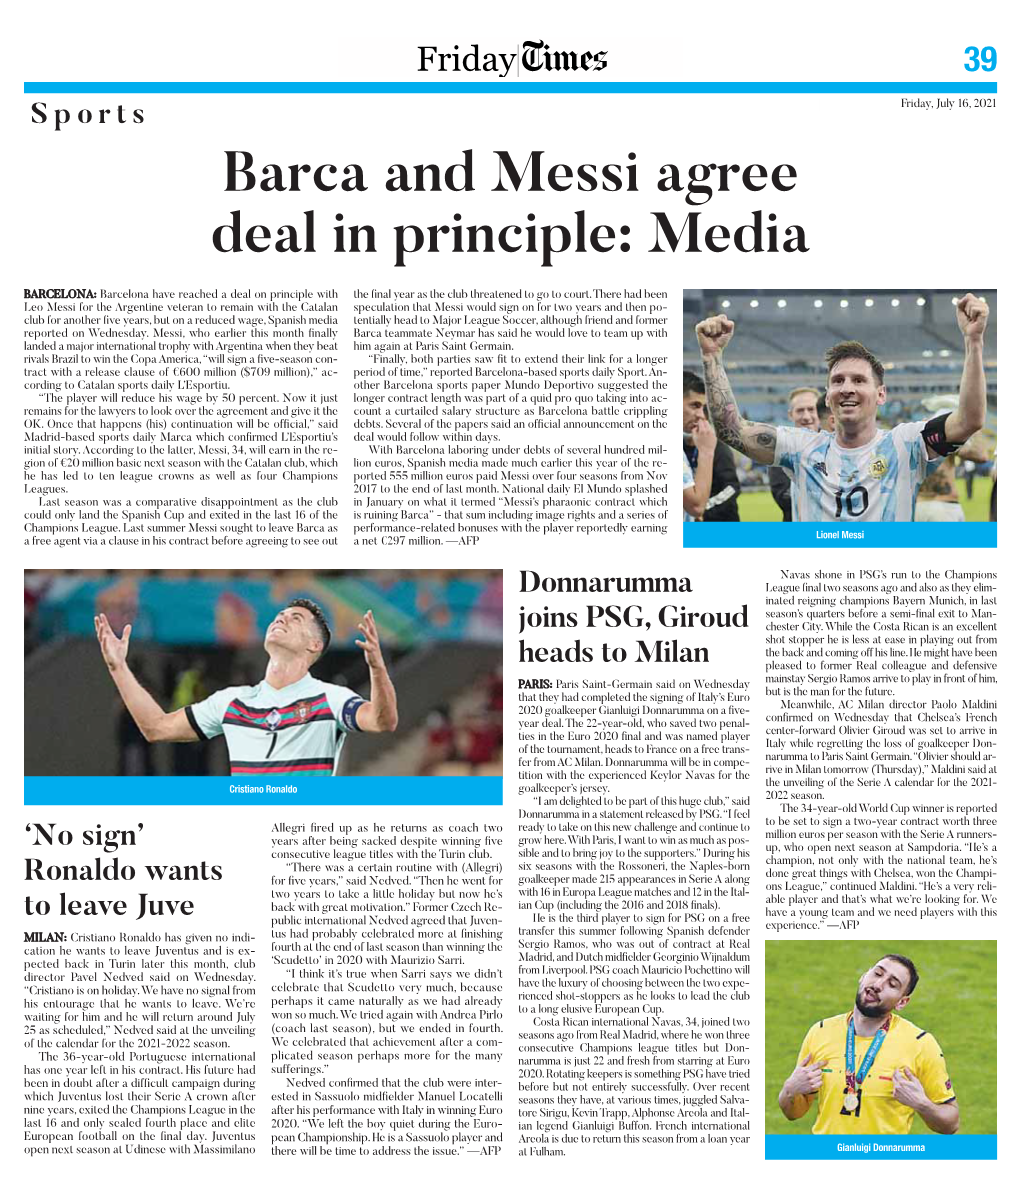 Barca and Messi Agree Deal in Principle: Media